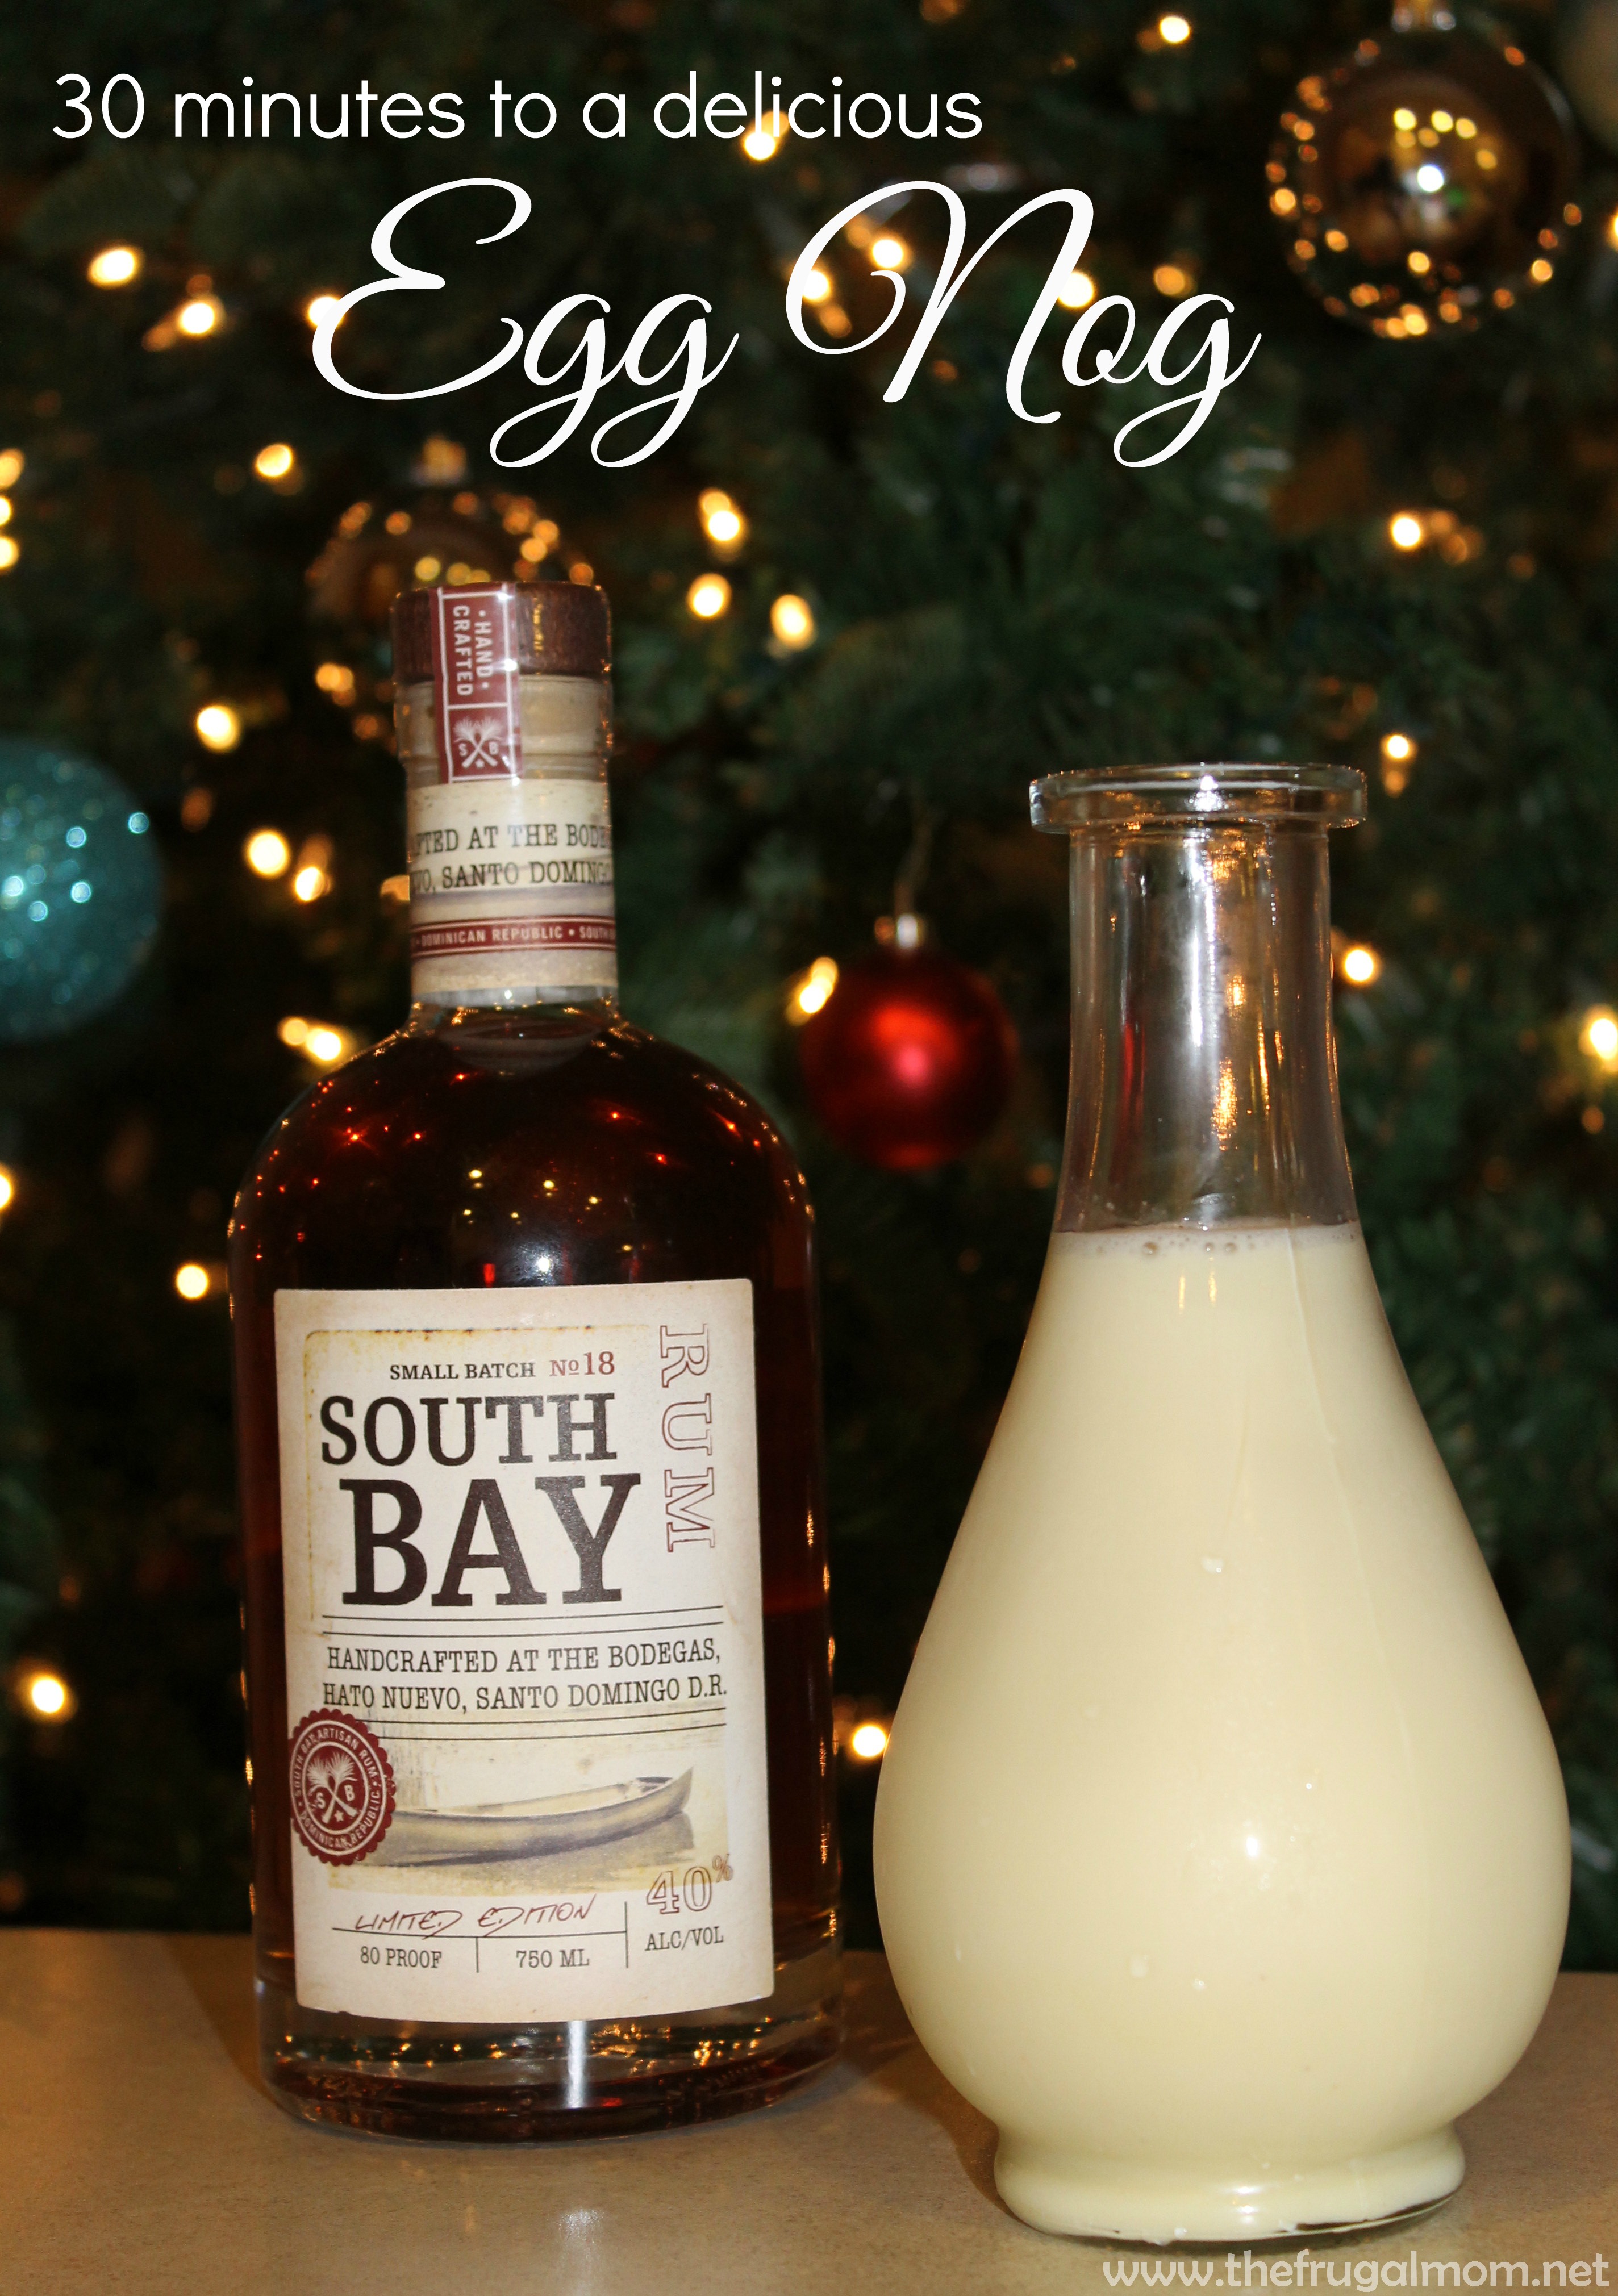 Try This 30 Minute Egg Nog Recipe This Holiday Season